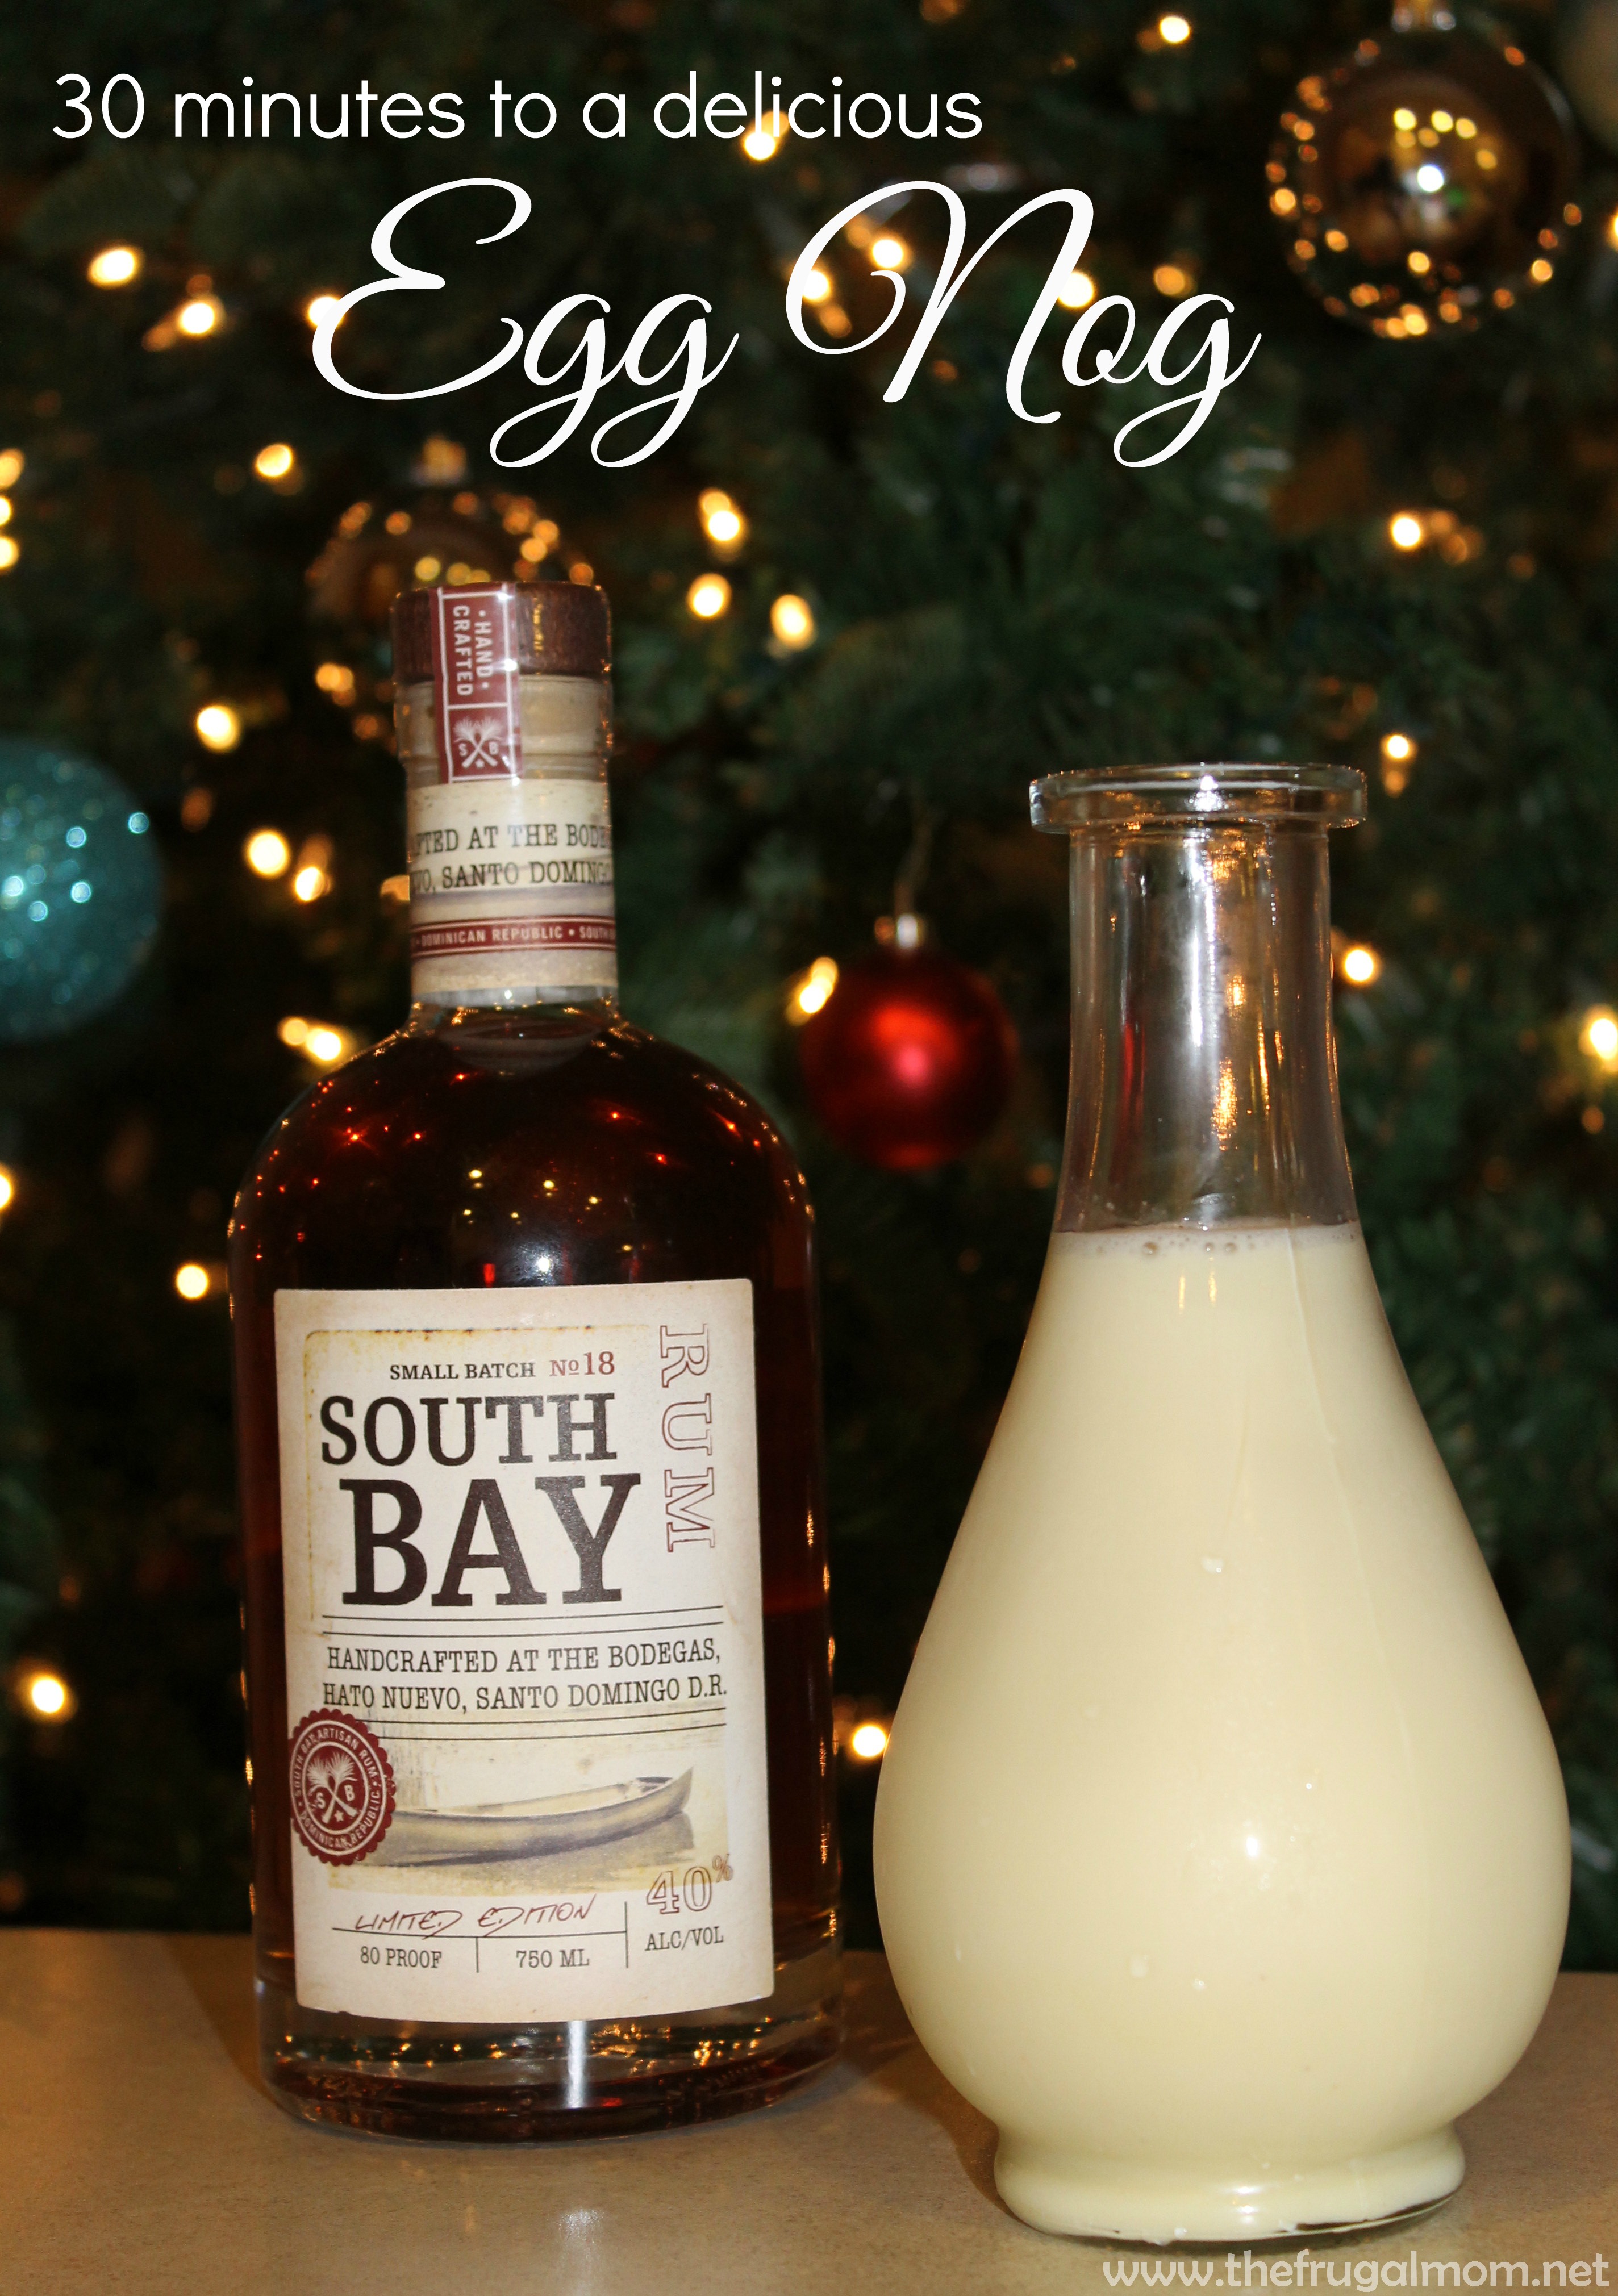 Try This 30 Minute Egg Nog Recipe This Holiday Season